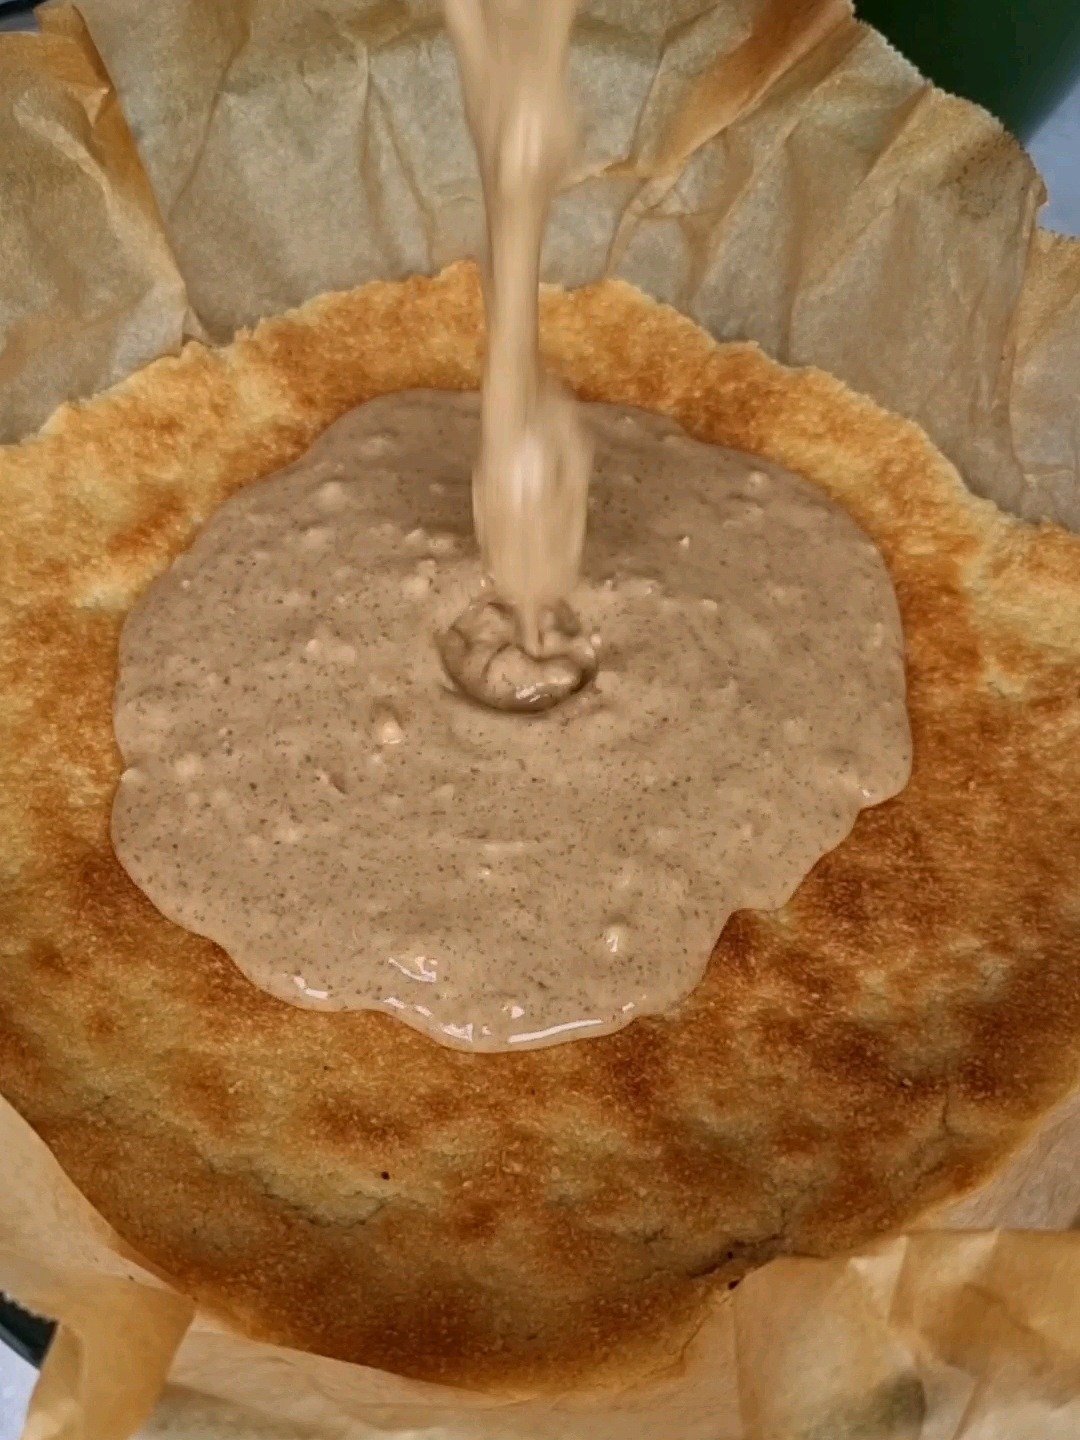 Pour the melted peanut butter on top of baked almond flour mix.